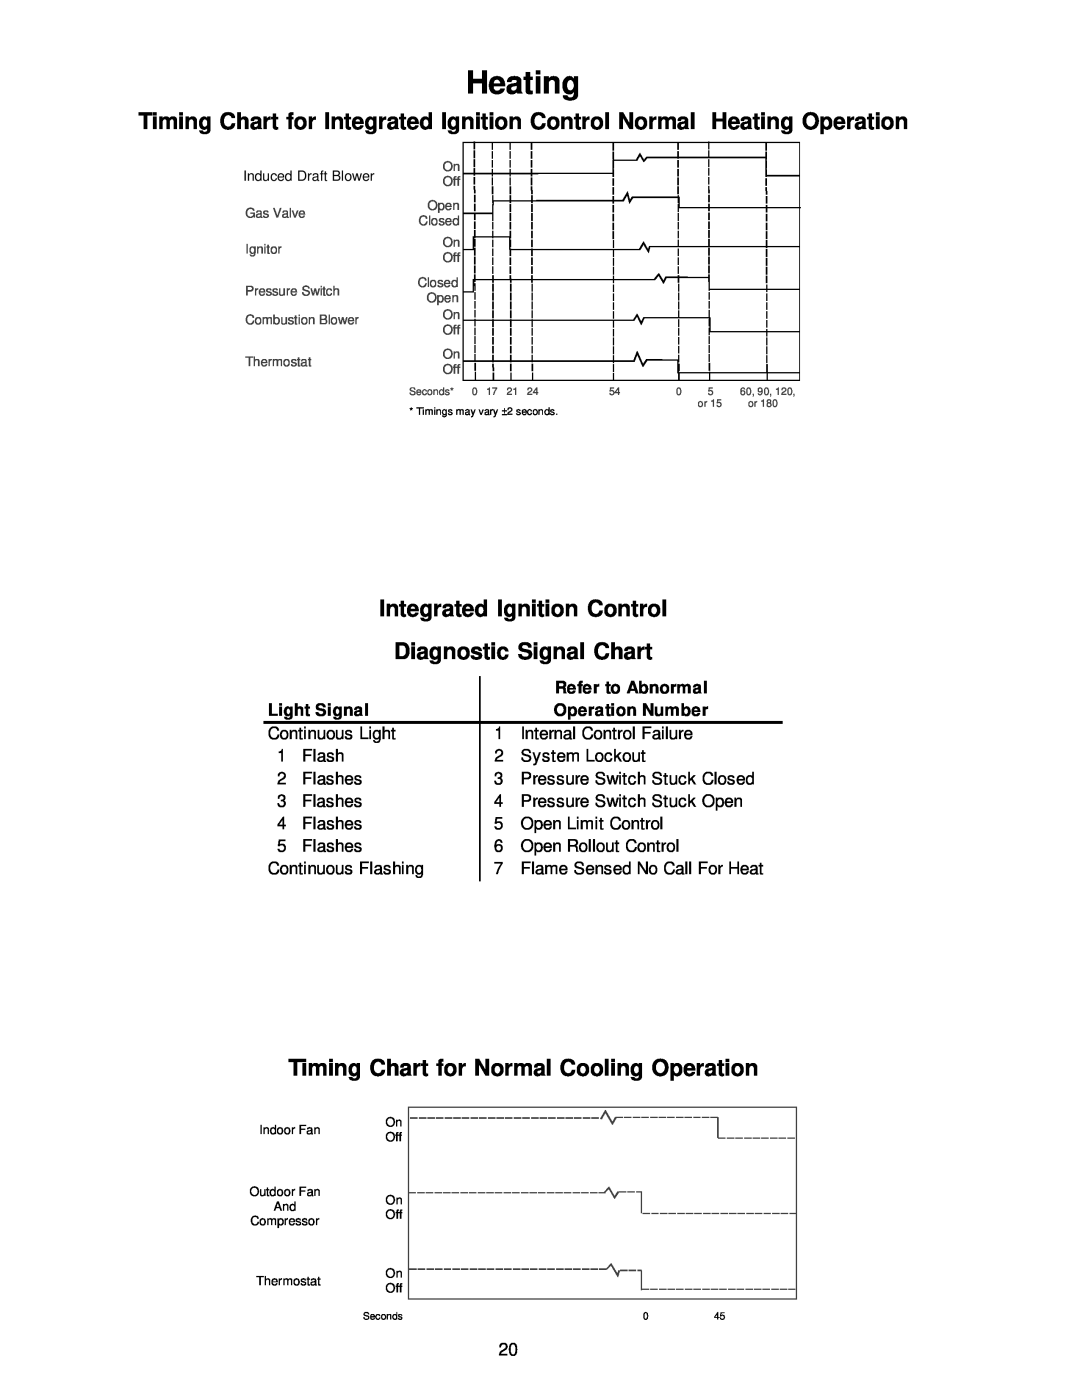 Amana VR8205 Heating, Integrated Ignition Control, Diagnostic Signal Chart, Timing Chart for Normal Cooling Operation 